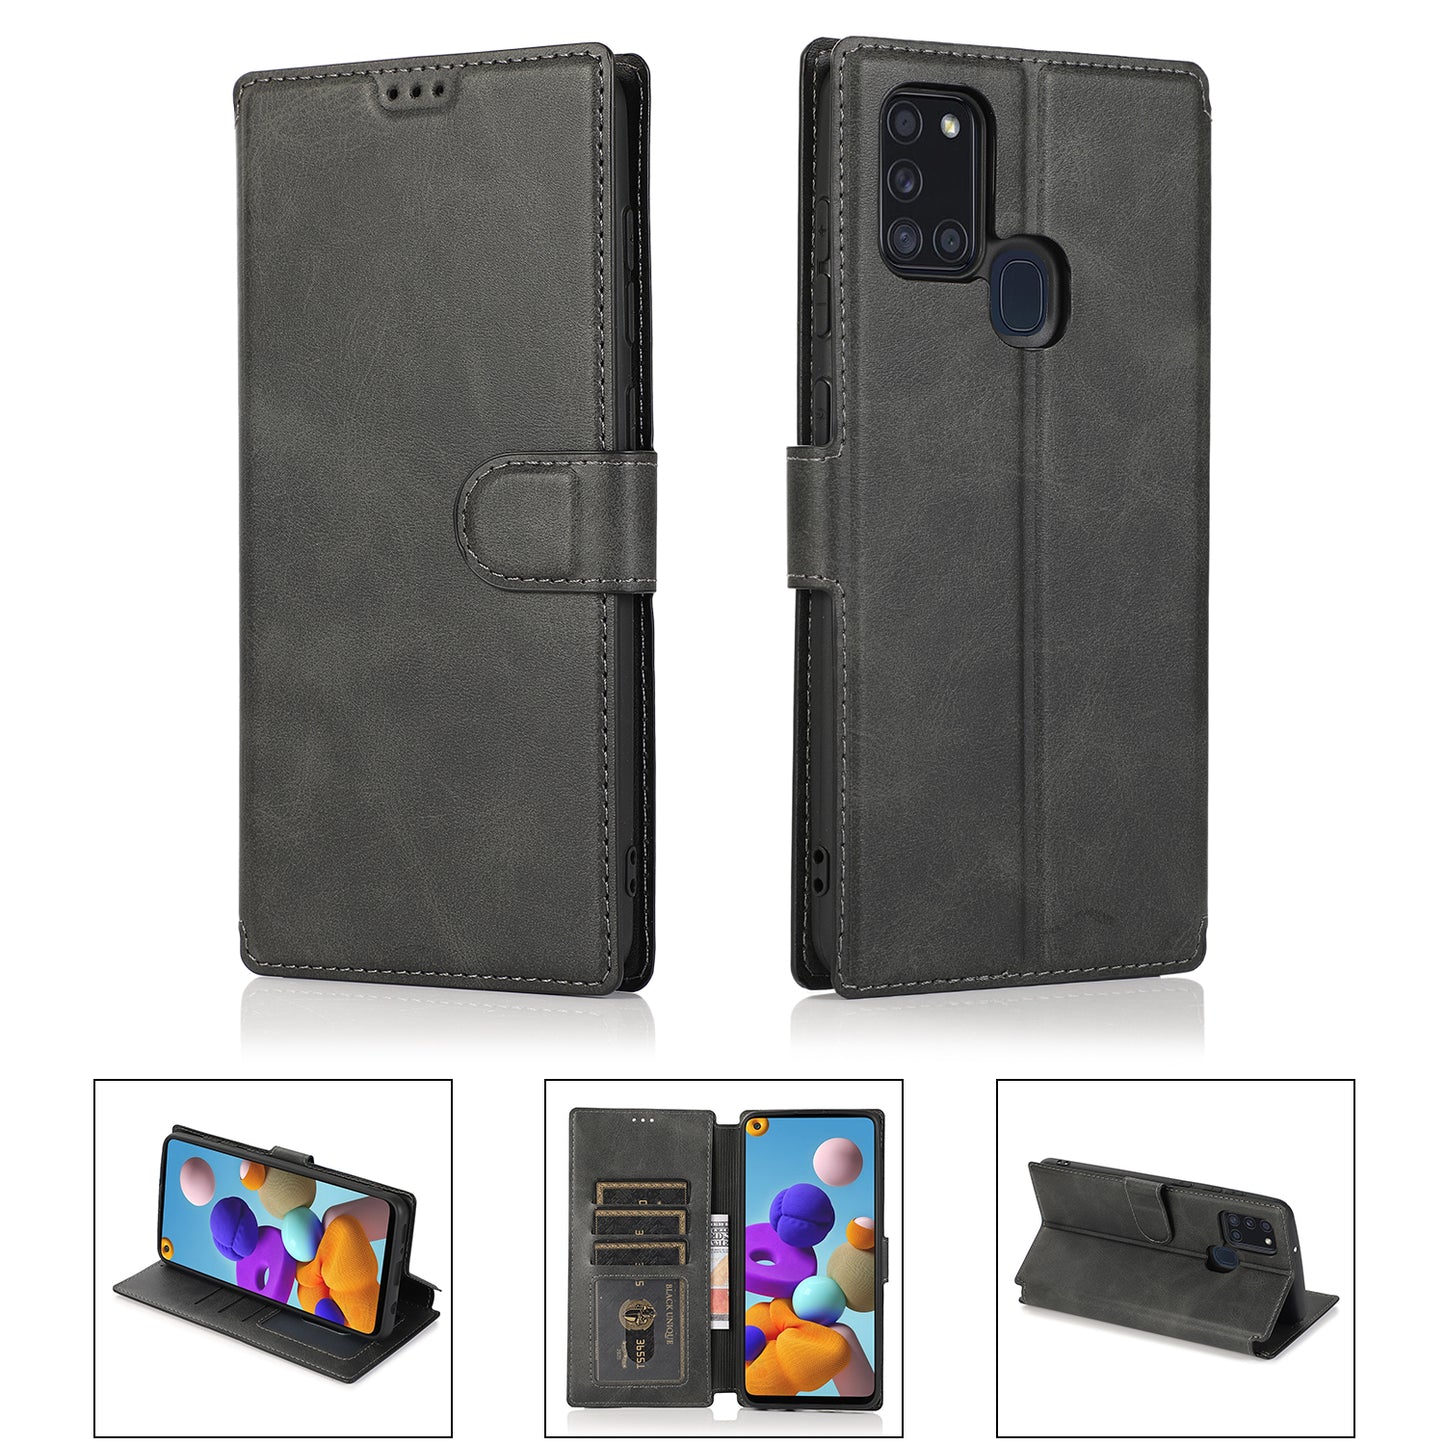 Samsung Galaxy A21s Leather Case Fexible Bracket Slim Wallet Magnetic Closure